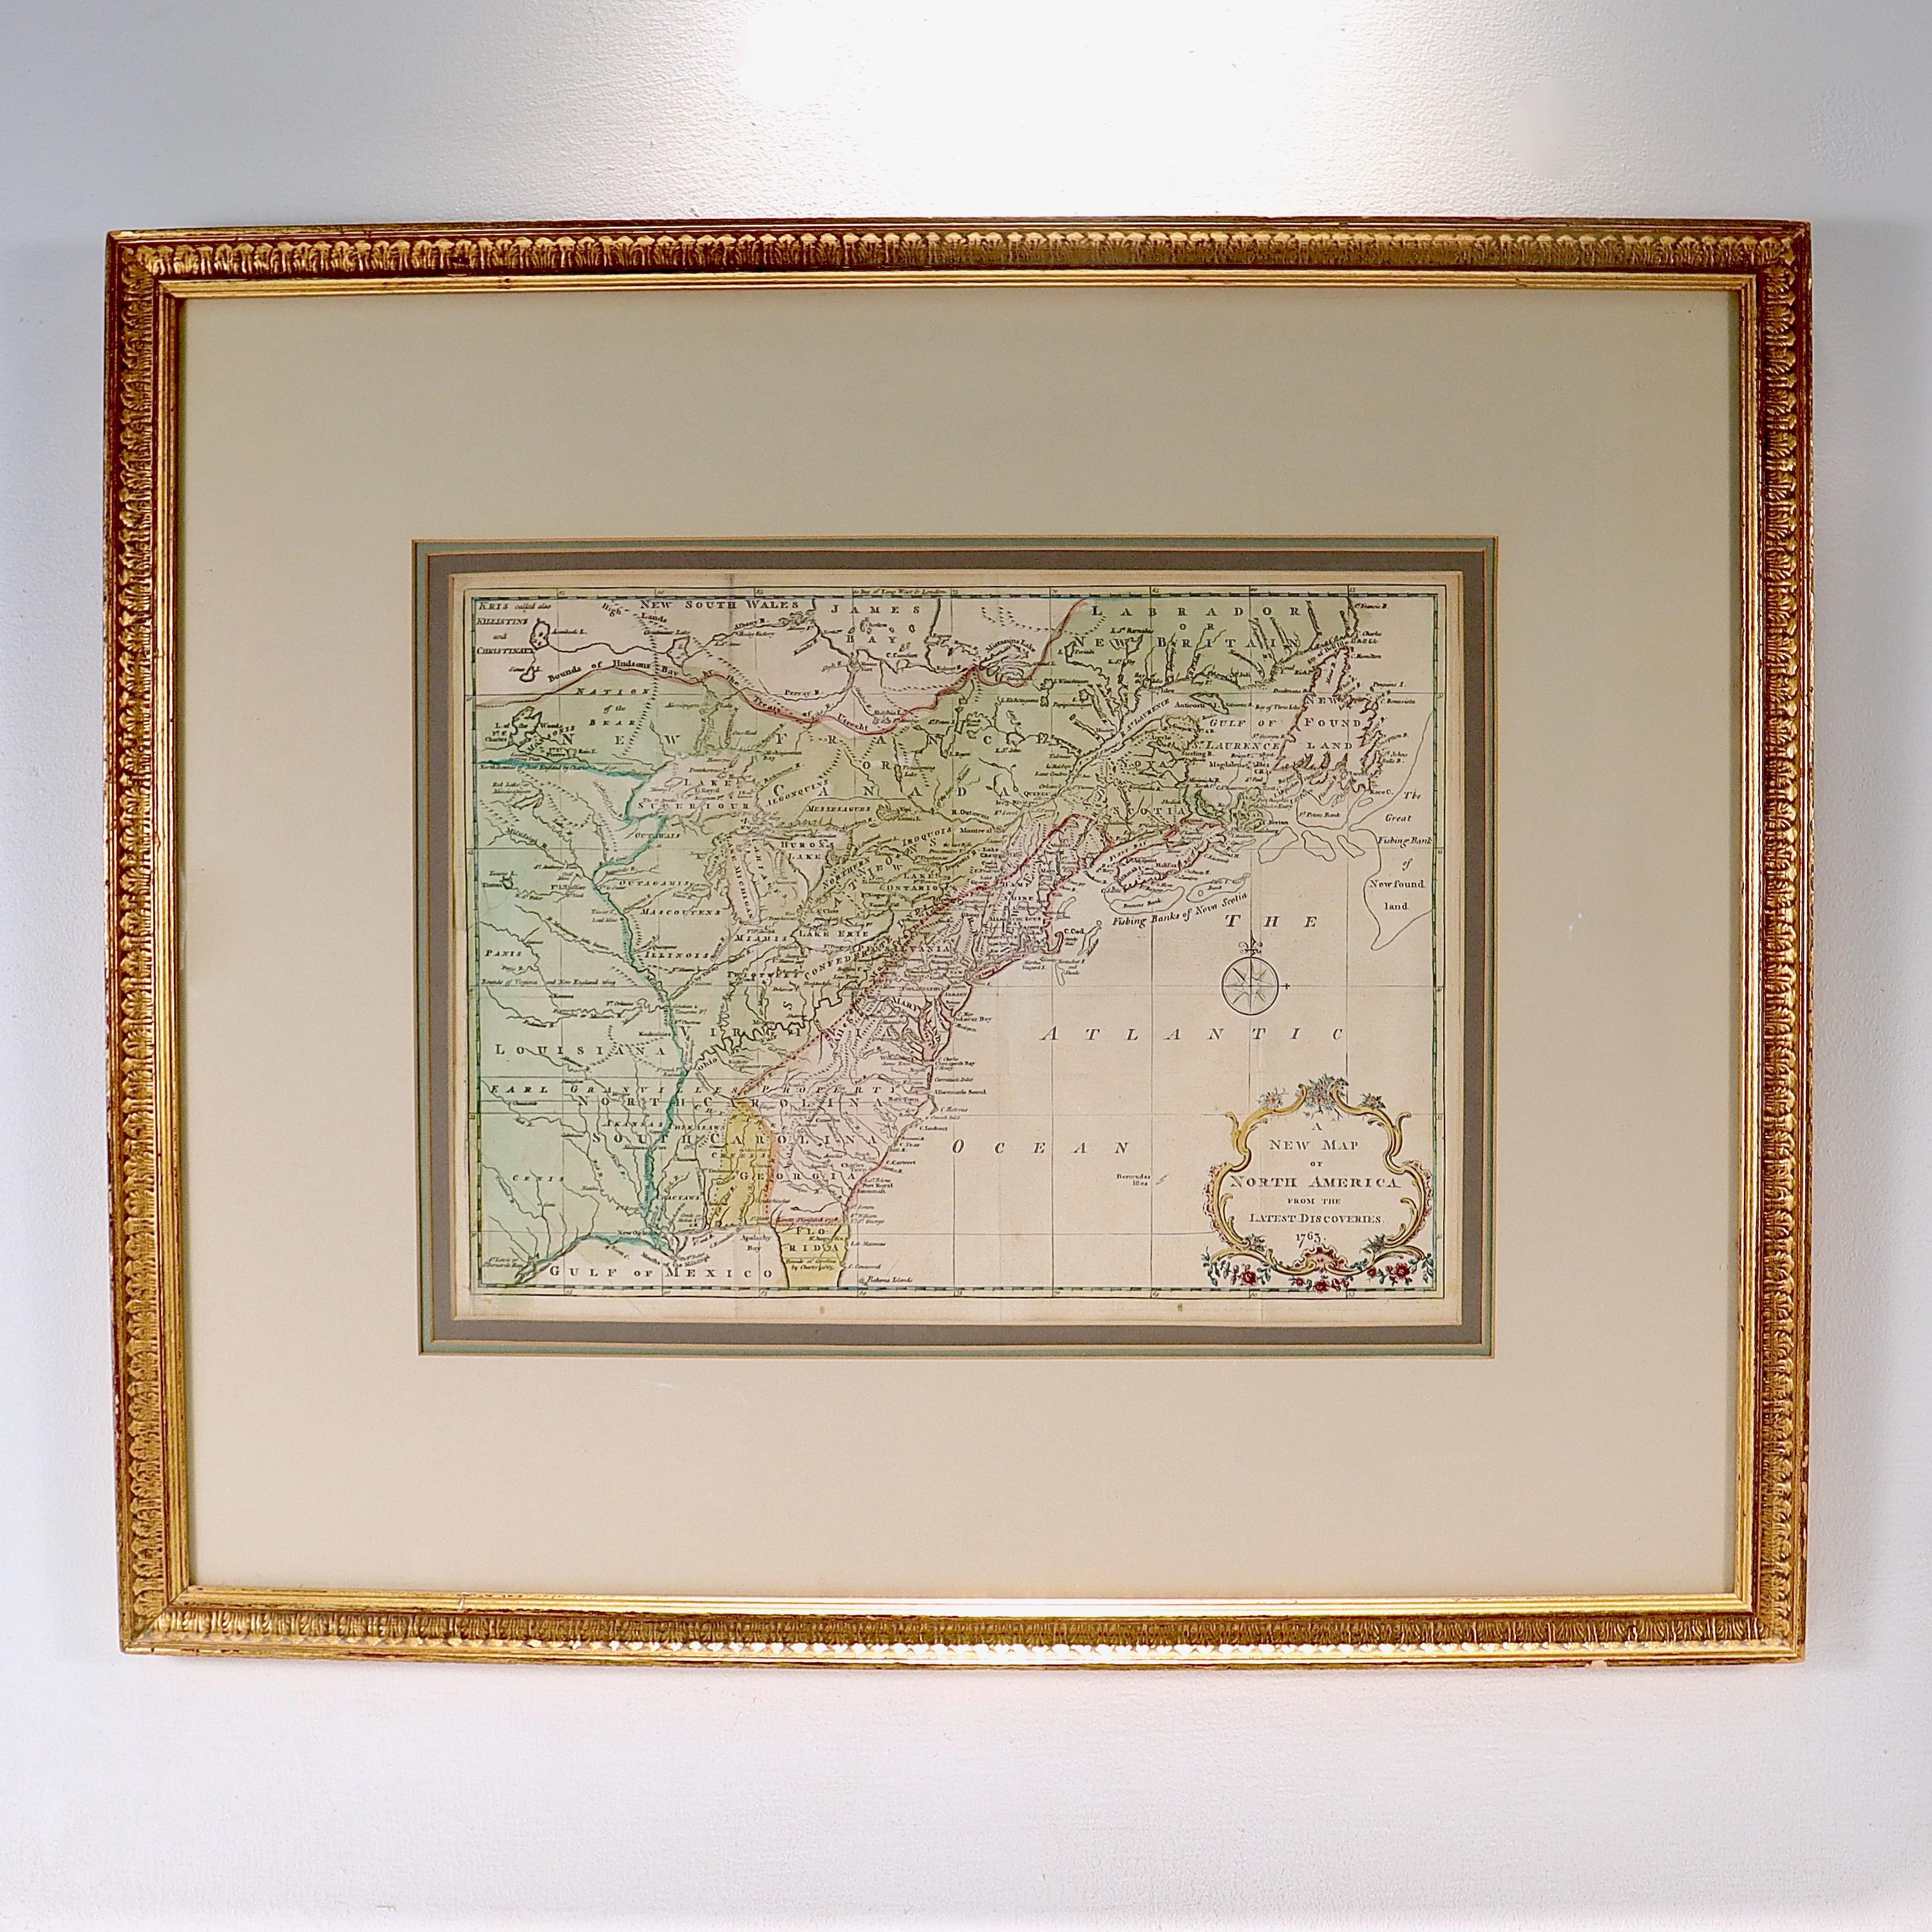 A fine antique 18th century map of the North American seaboard.

Entitled 